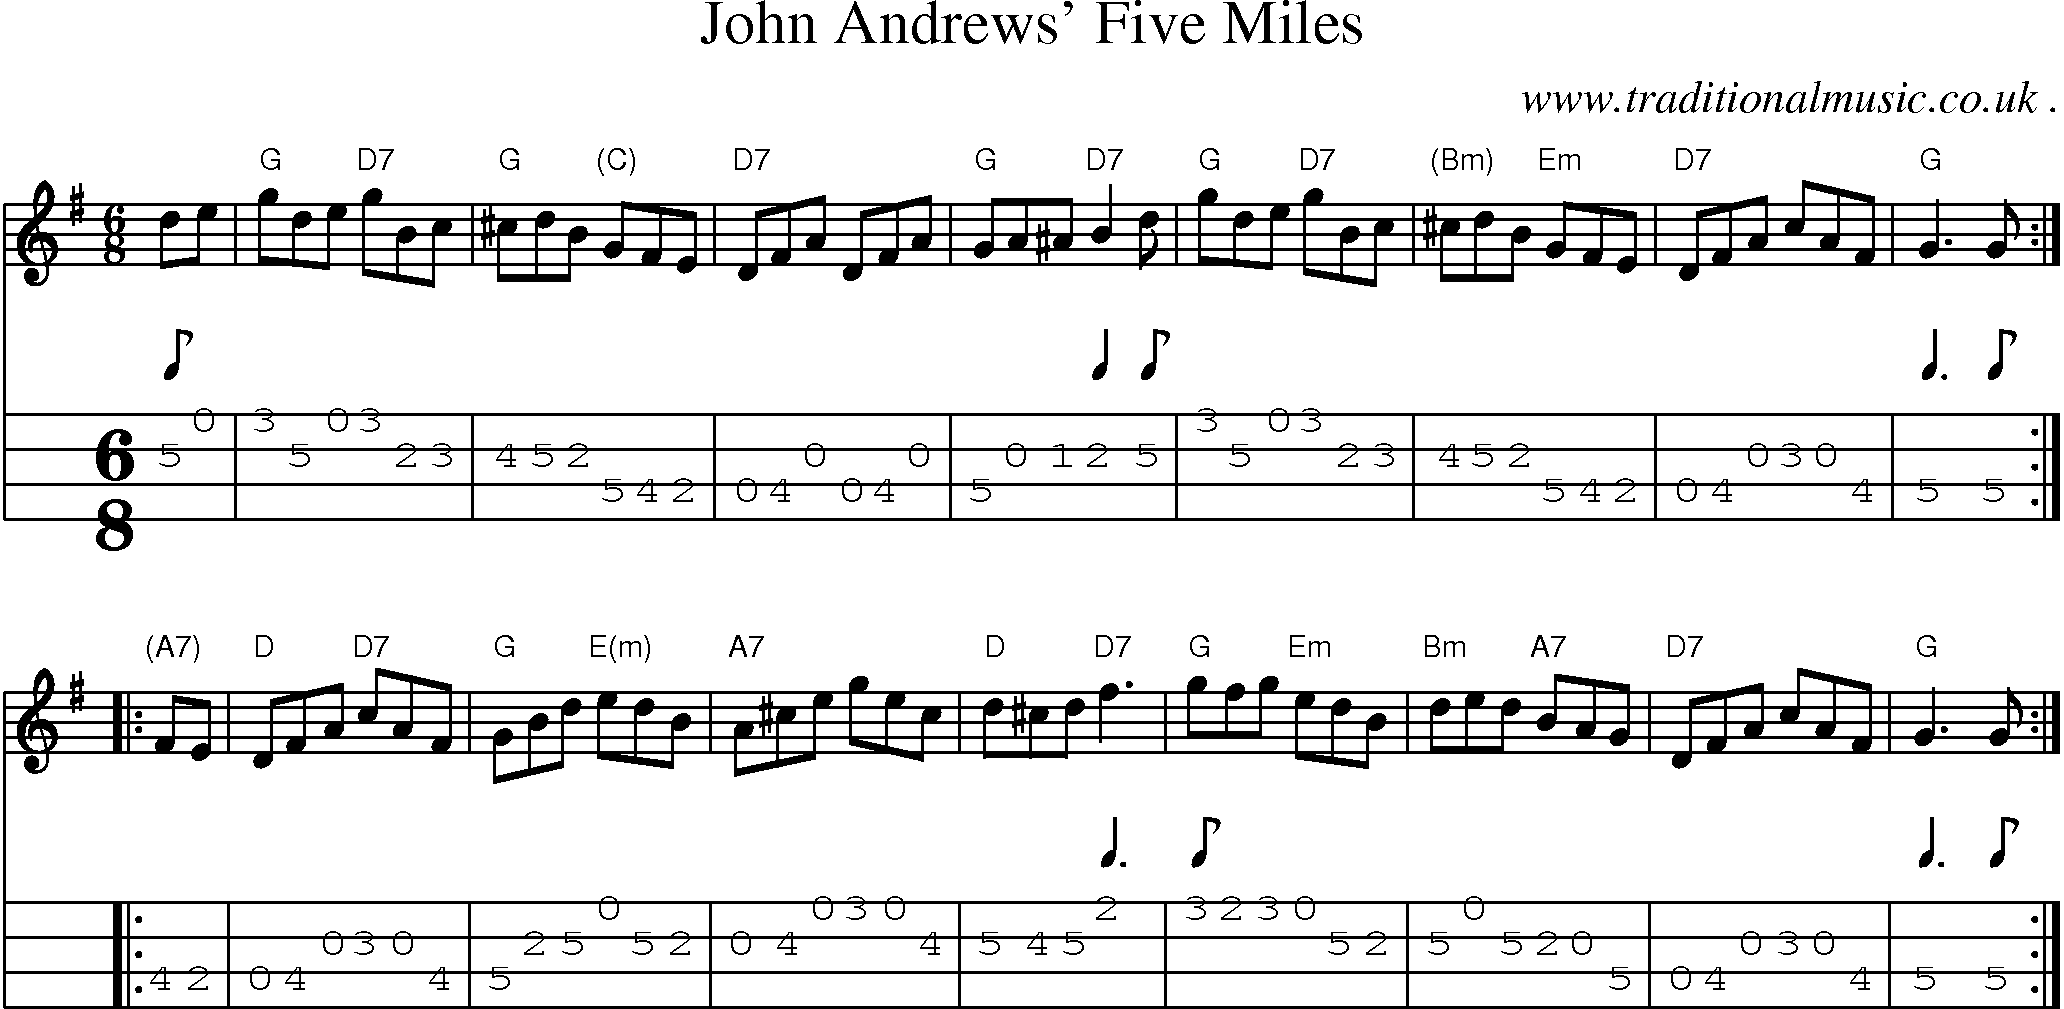 Sheet-music  score, Chords and Mandolin Tabs for John Andrews Five Miles